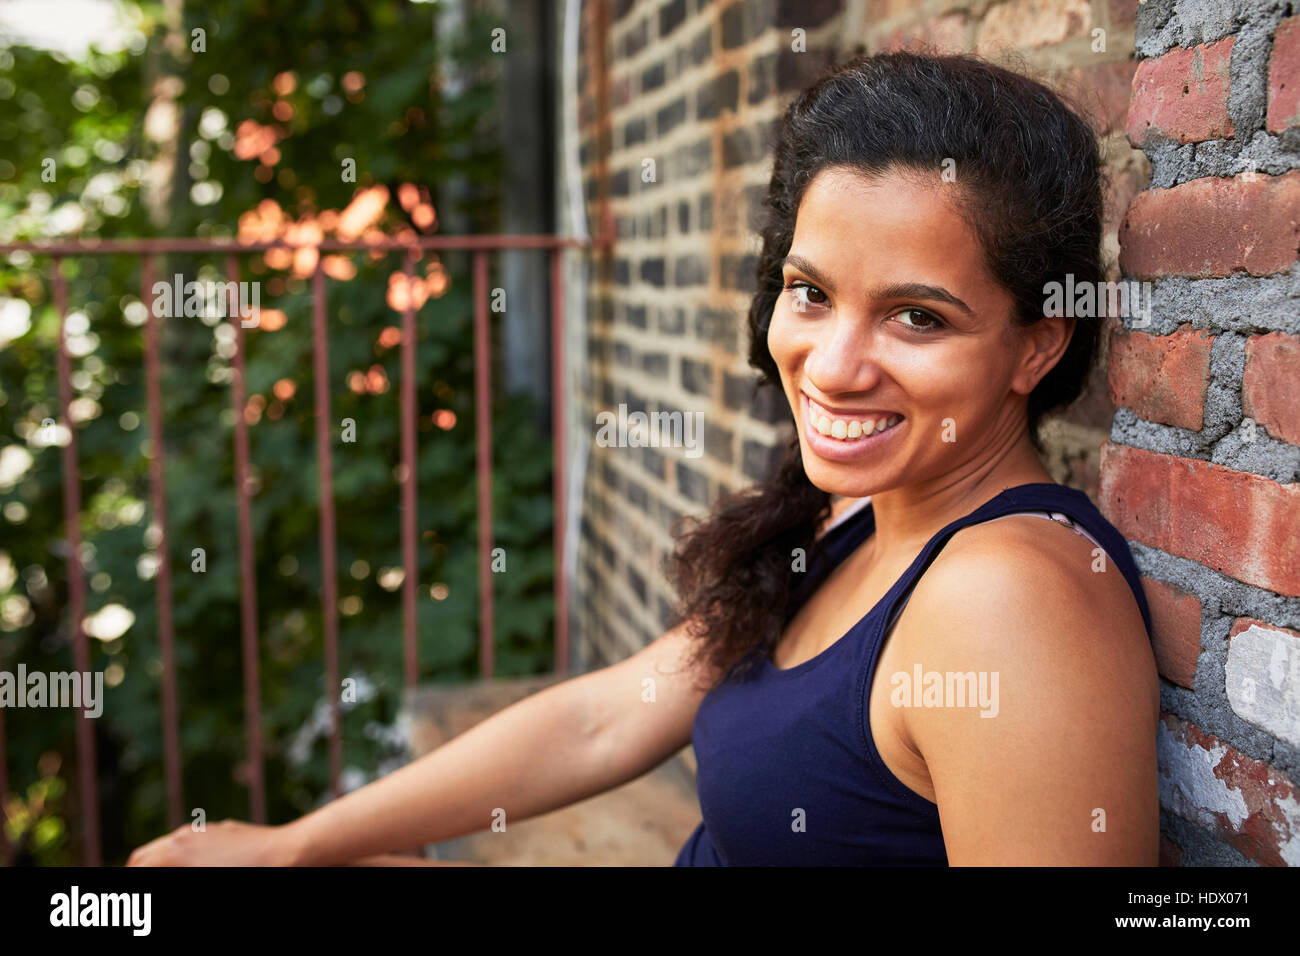 Portrait of smiling woman sitting on urban fire escape Stock Photo